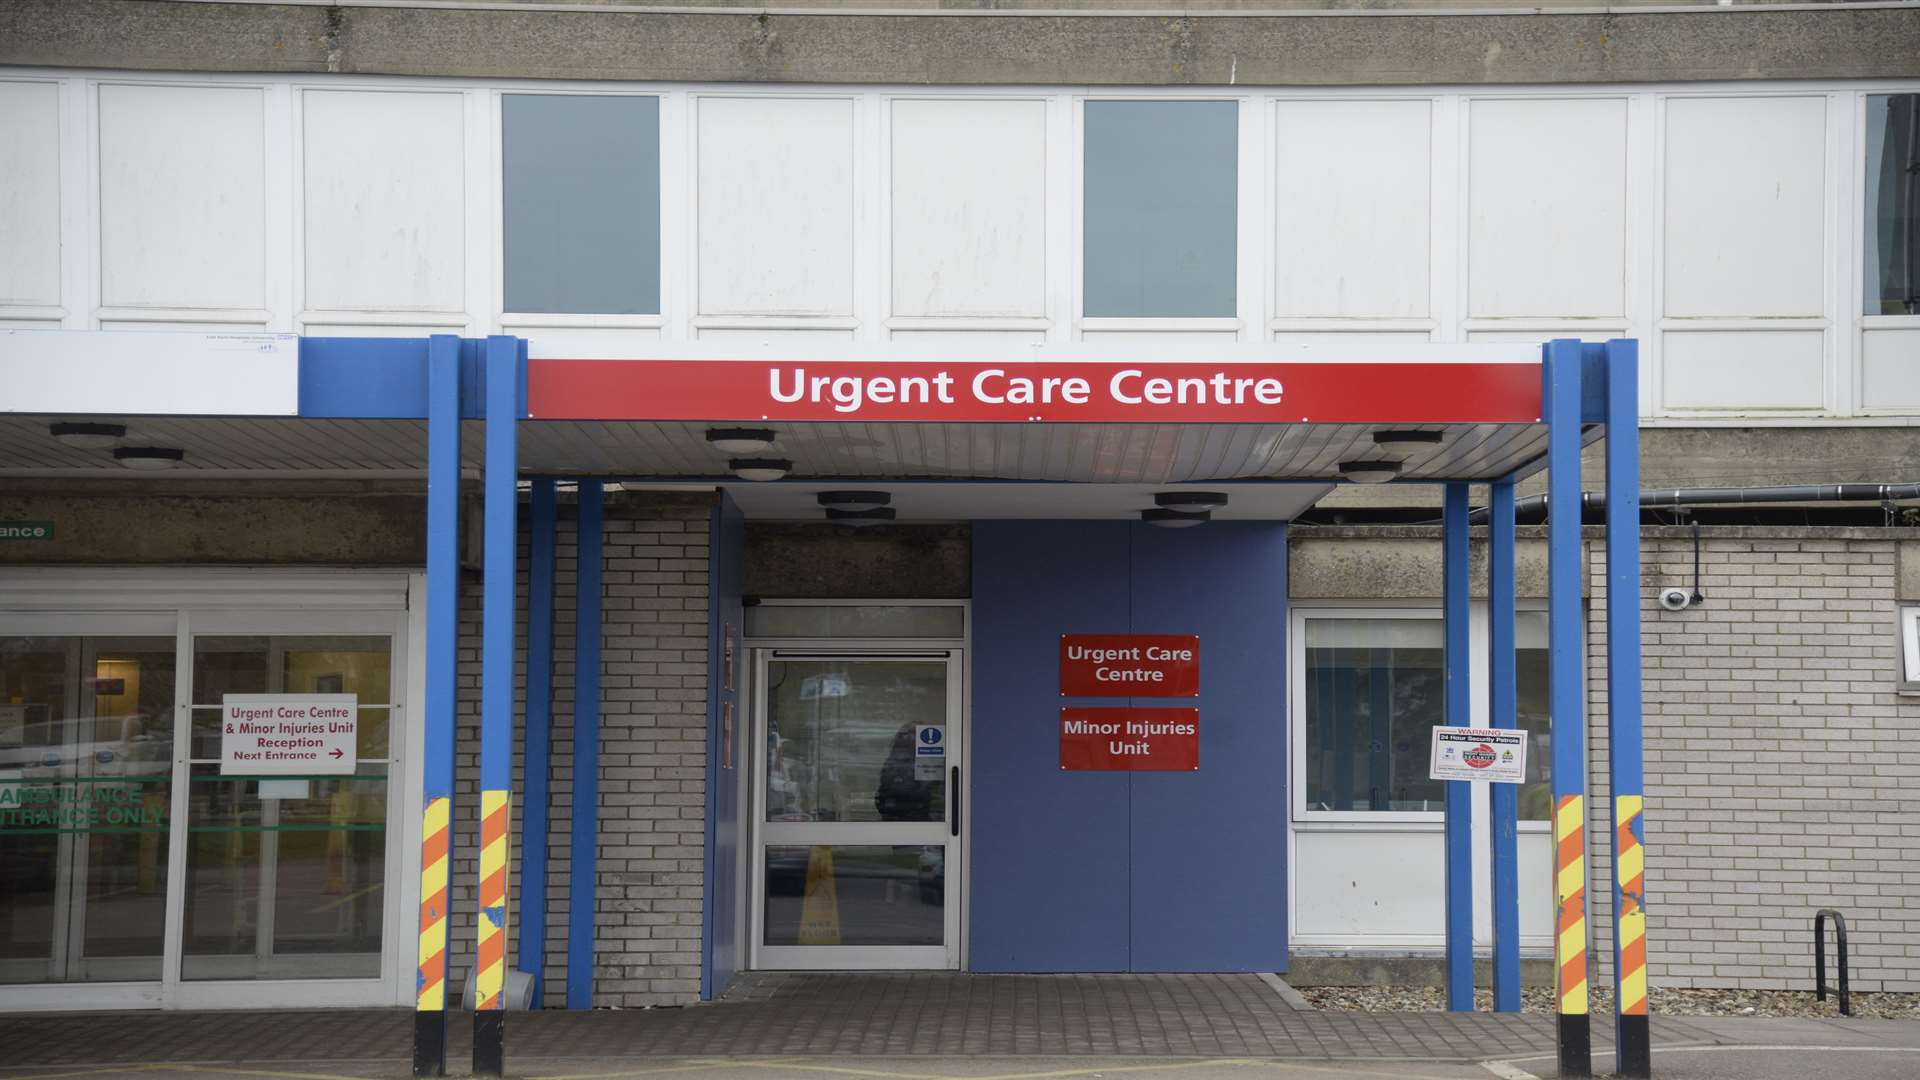 The Urgent Care Centre at the Kent & Canterbury Hospital is risk of closure.